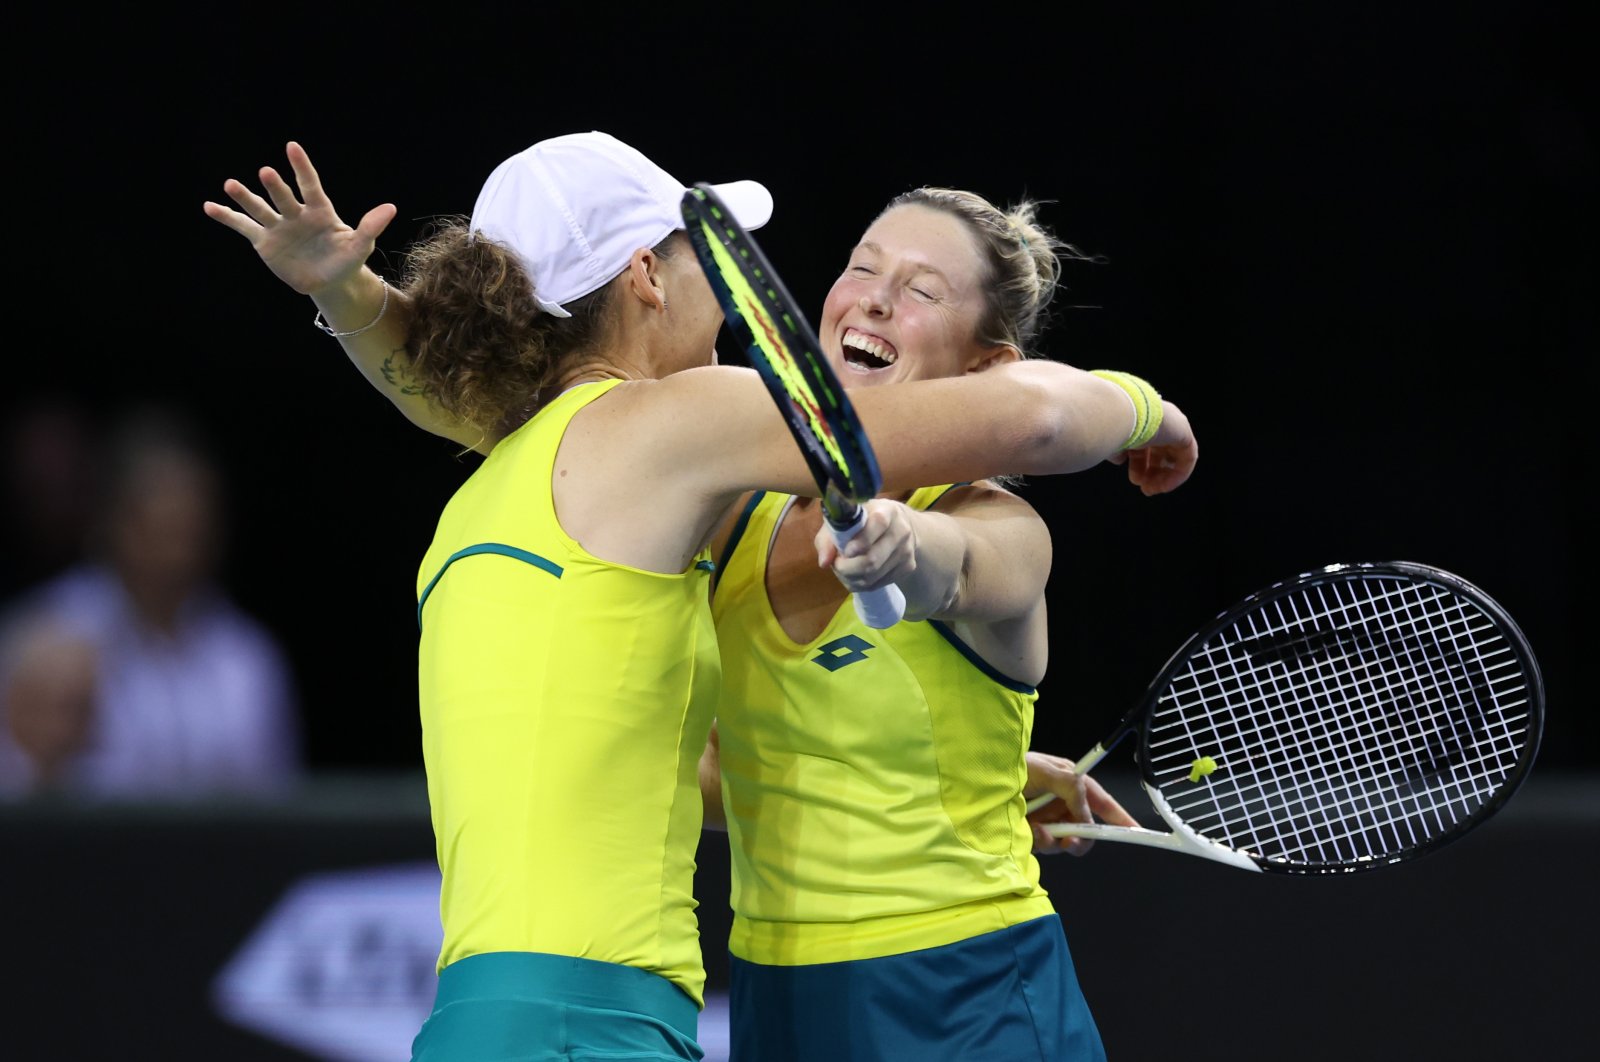 Storm Sanders and Samantha Stosur of Team Australia celebrate winning the semifinal match between Team Australia and Team Great Britain at Emirates Arena, Glasgow, Scotland, Nov. 12, 2022. (Getty Images Photo)